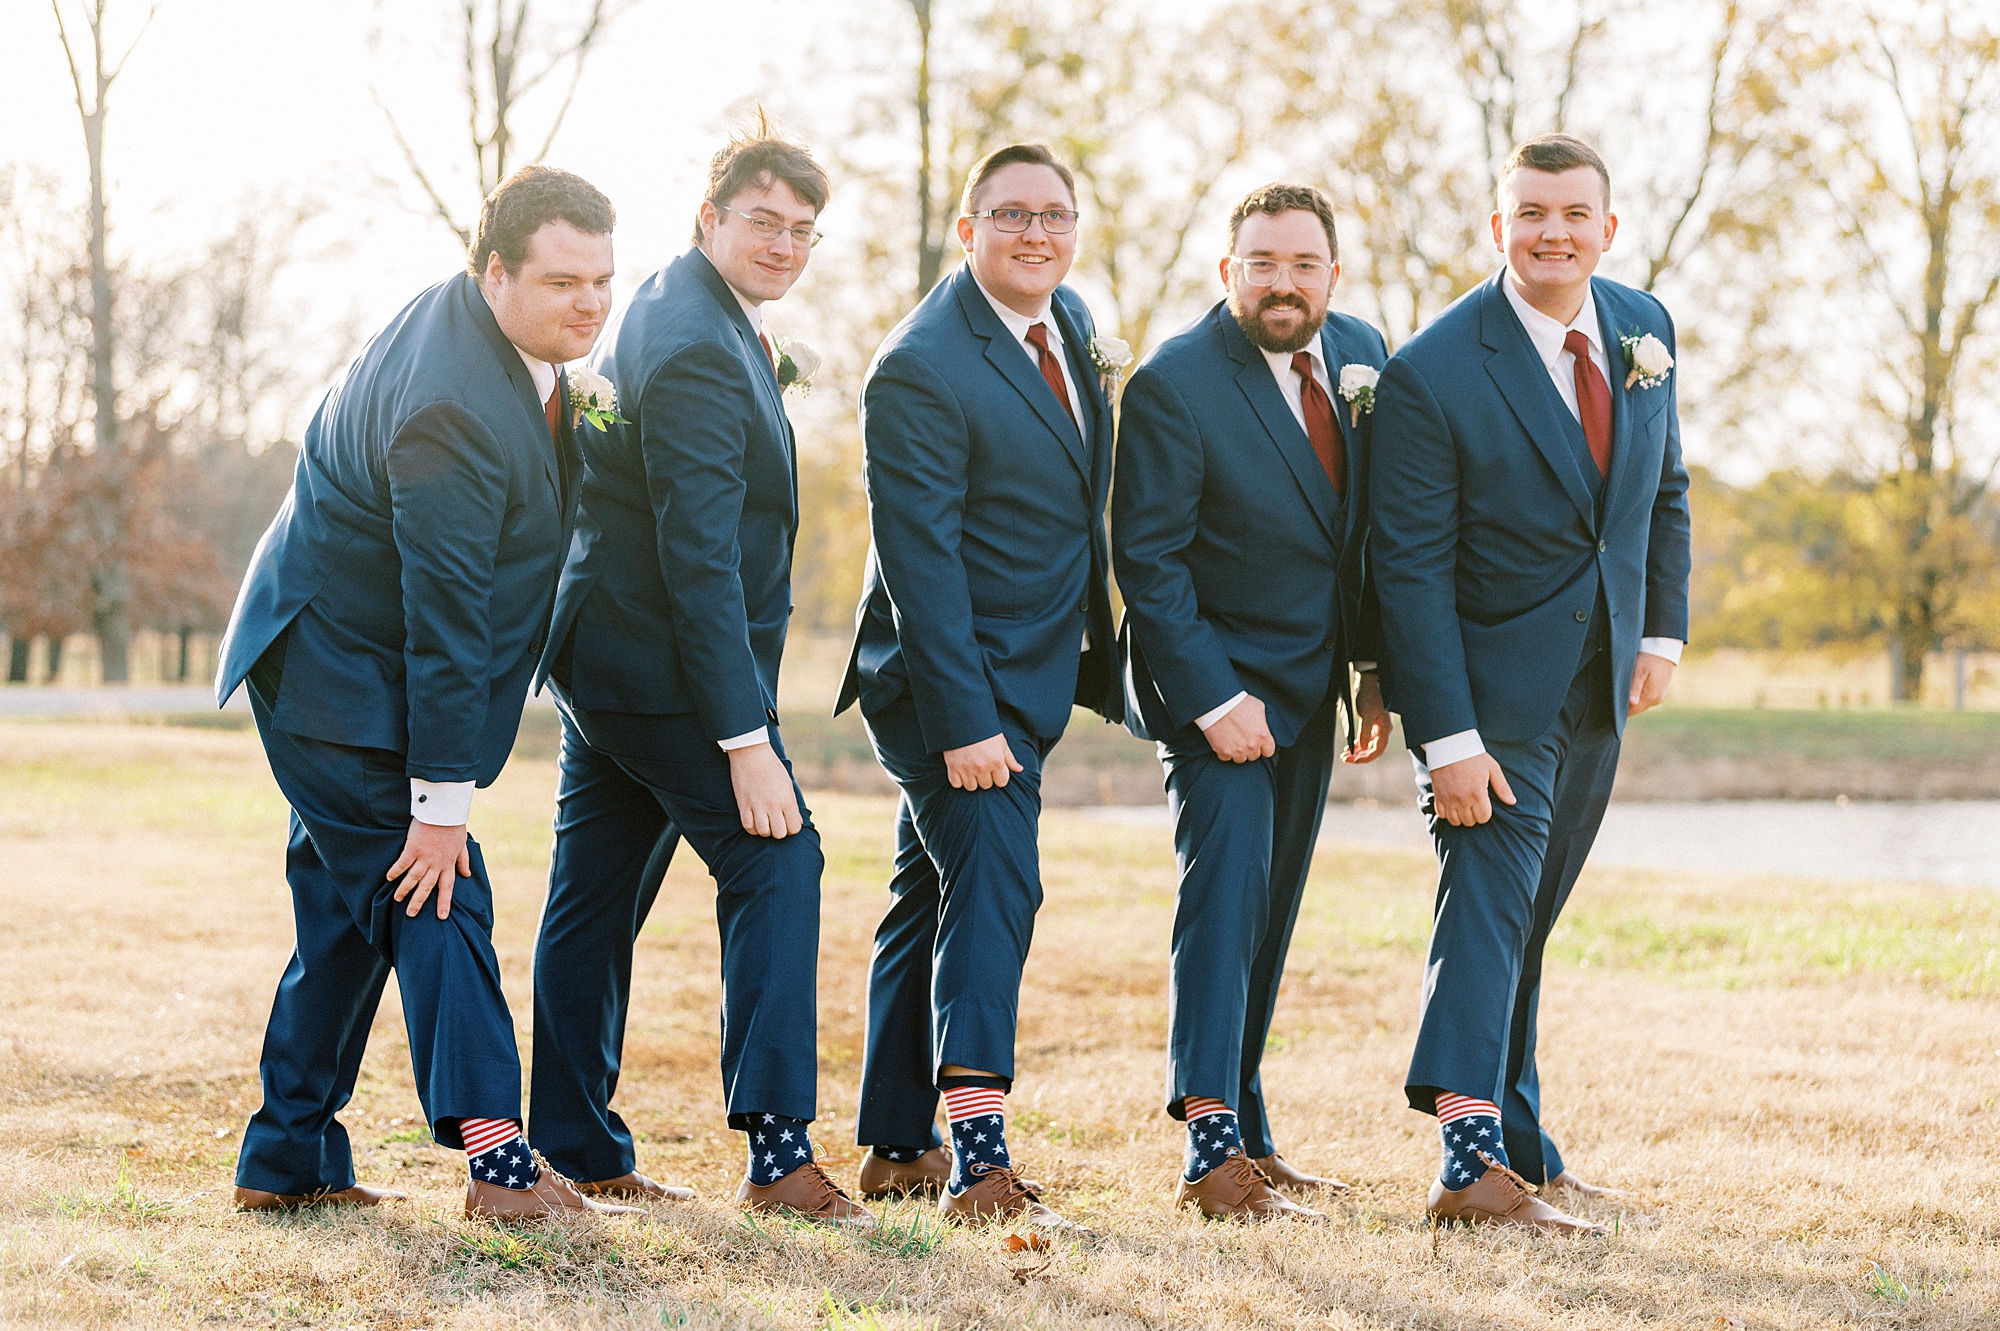 groom and groomsmen in navy suits lift up pants to show fun socks 